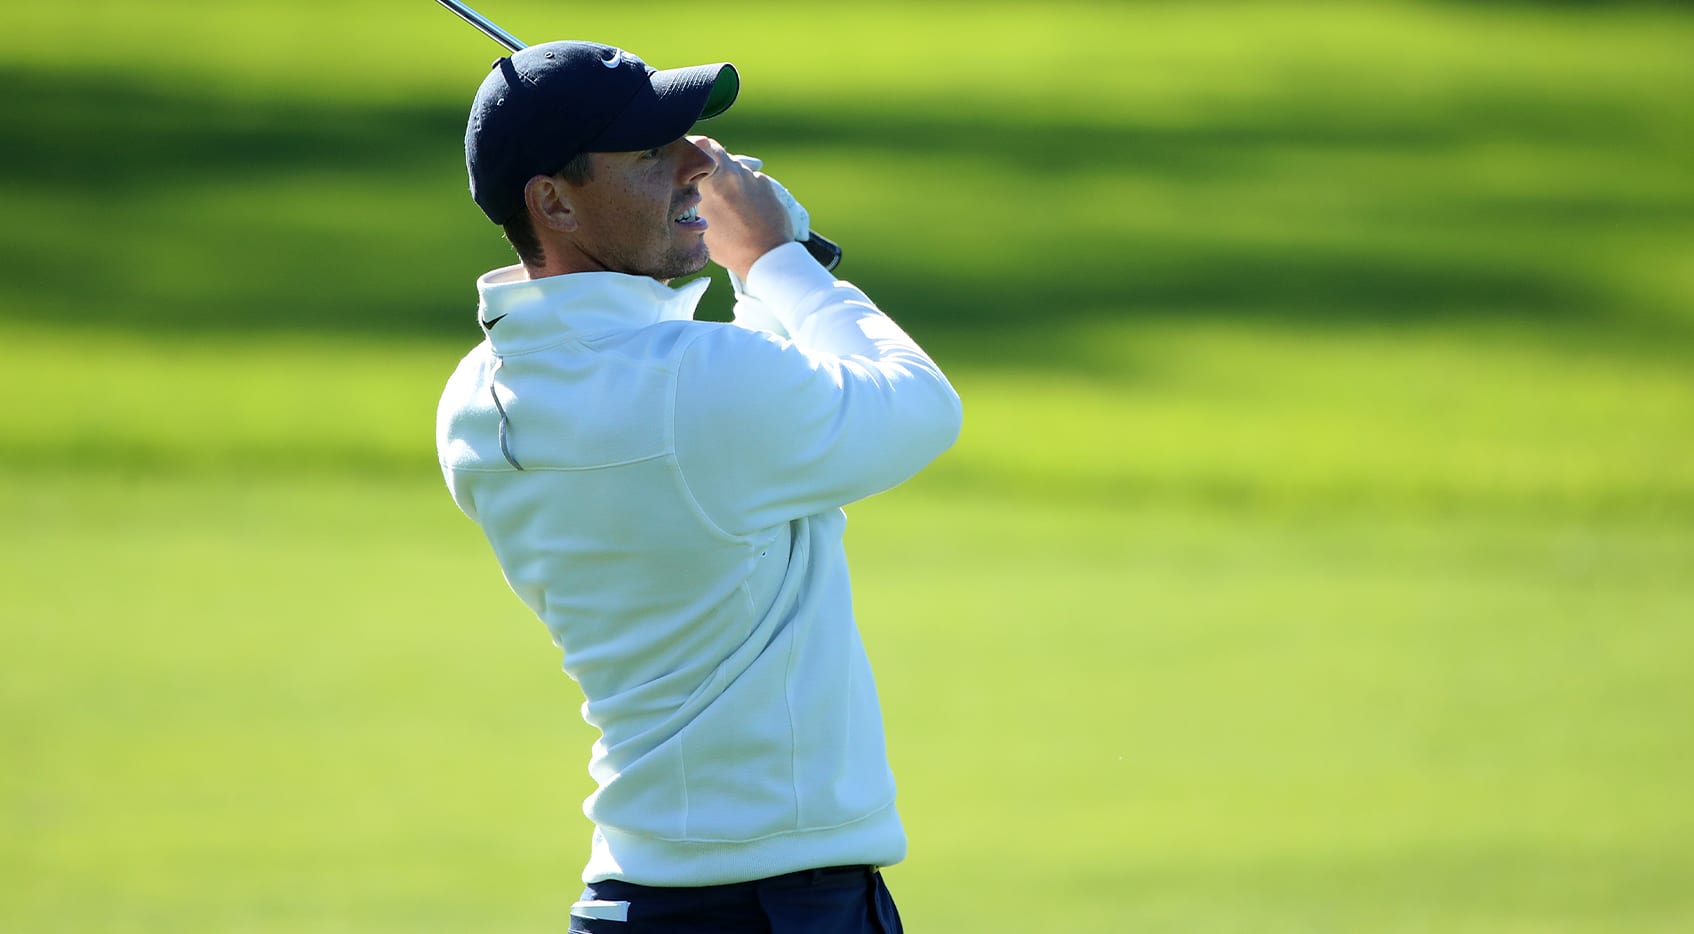 Rory McIlroy takes proper relief on No